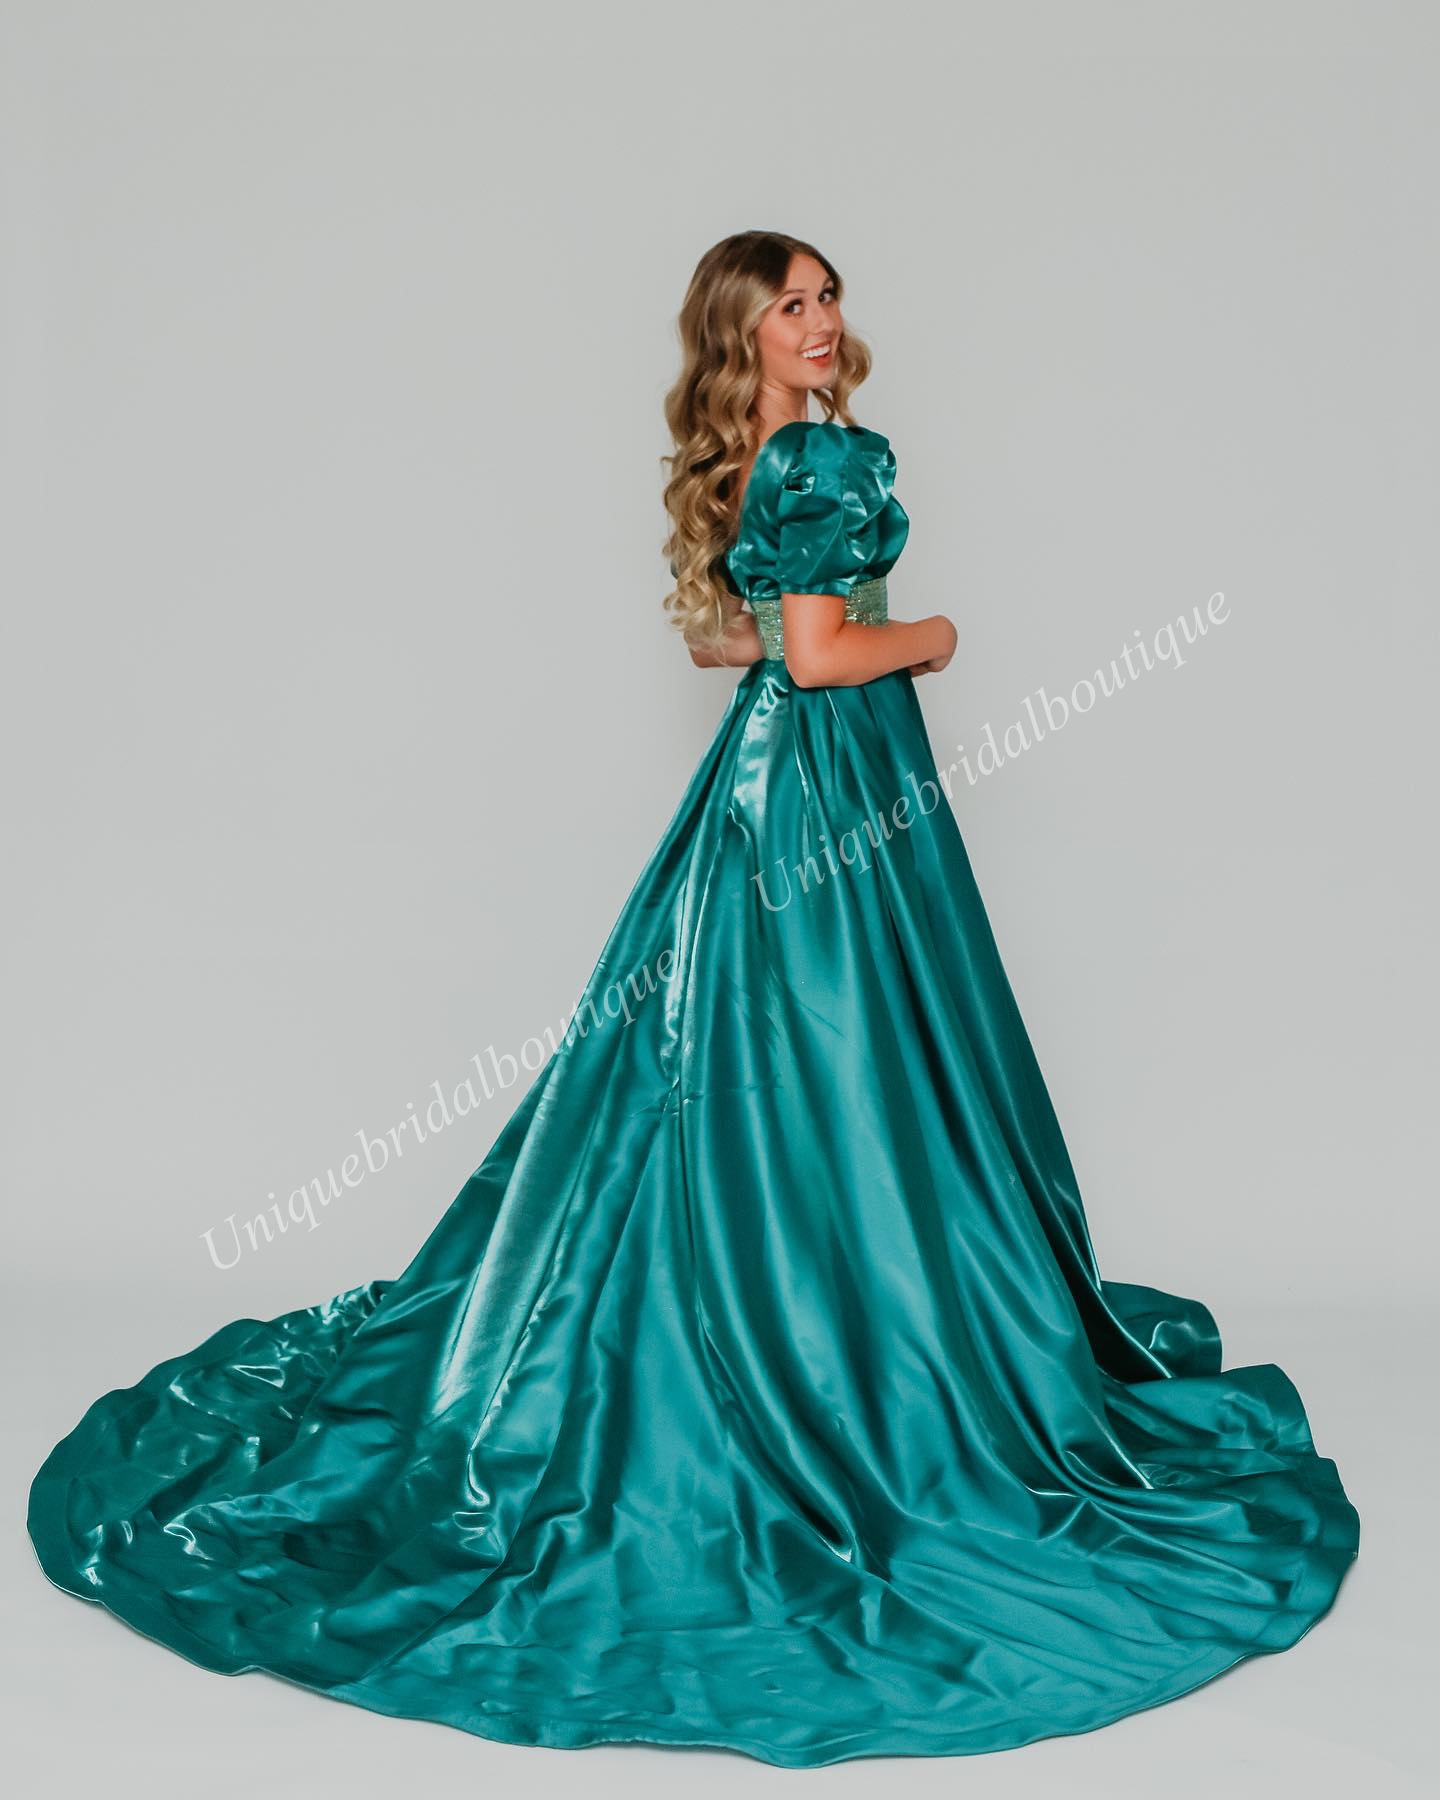 Shimmer Satin Formell aftonklänning 2K24 Puff Sleeve V-ringad lady Pageant Prom Cocktail Party Gown Saudi Arabia Red Carpet Runway Drama Crystal Aqua Emerald Winter